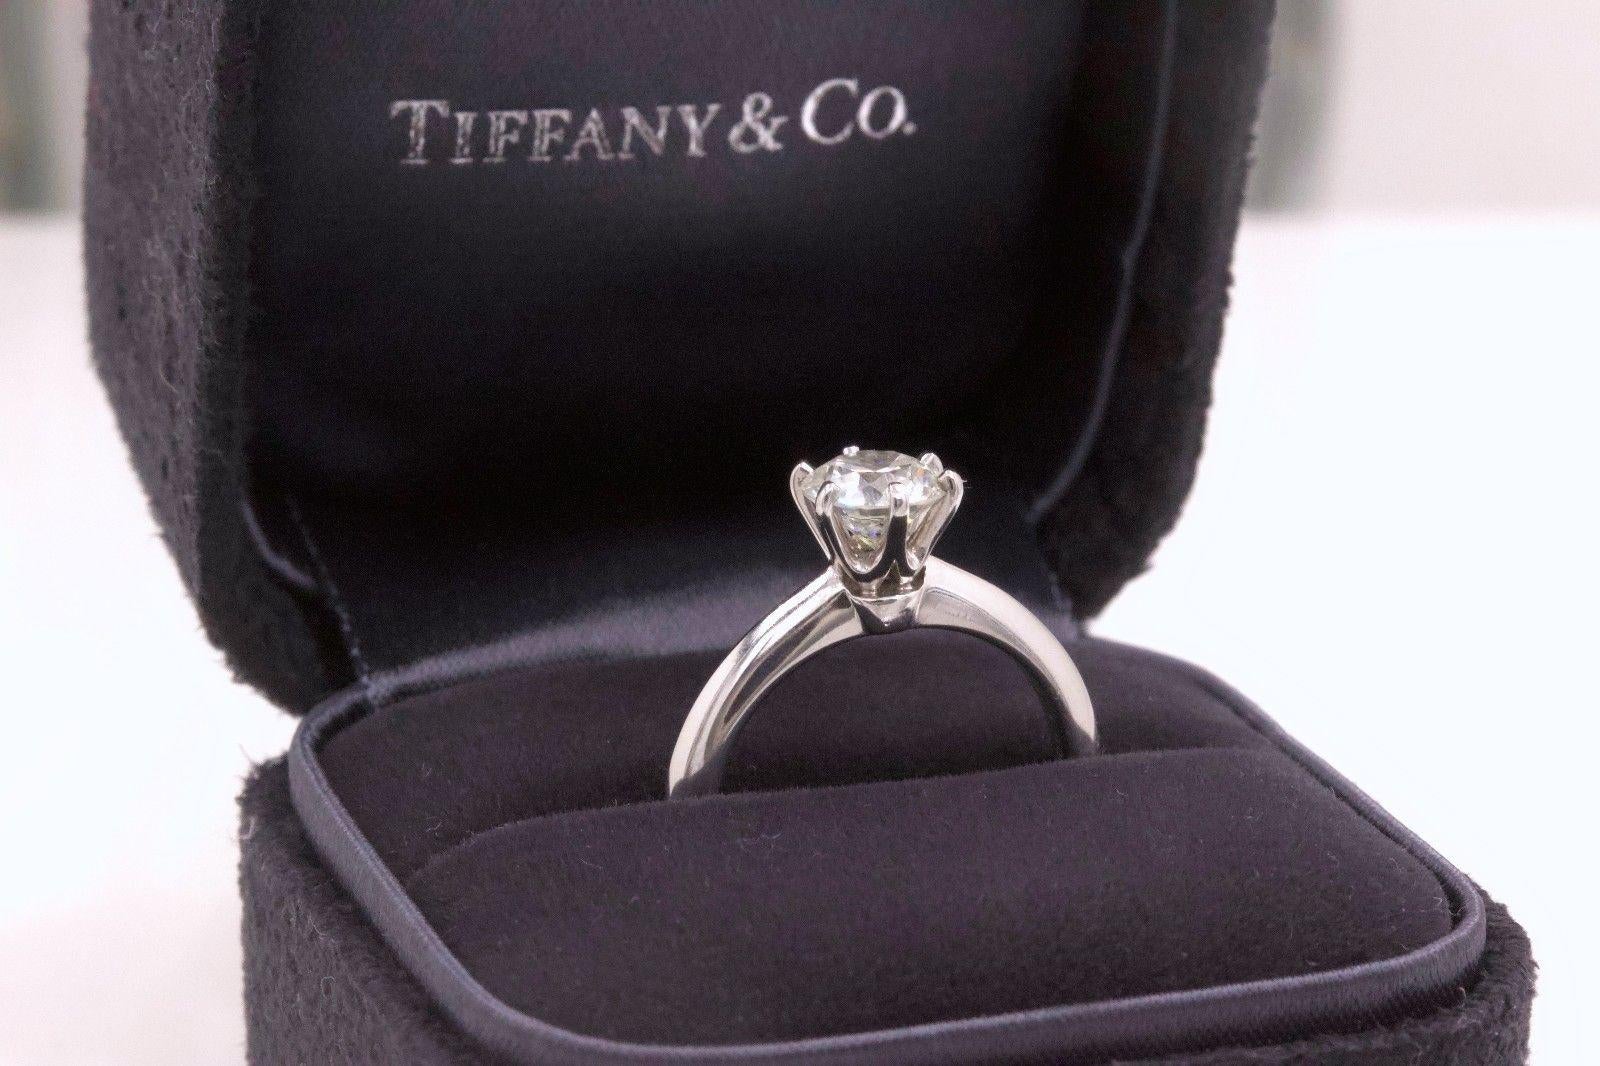 Tiffany & Co. Round Diamond Ring Solitaire 1.00 Carat H VS1 Papers Box 3